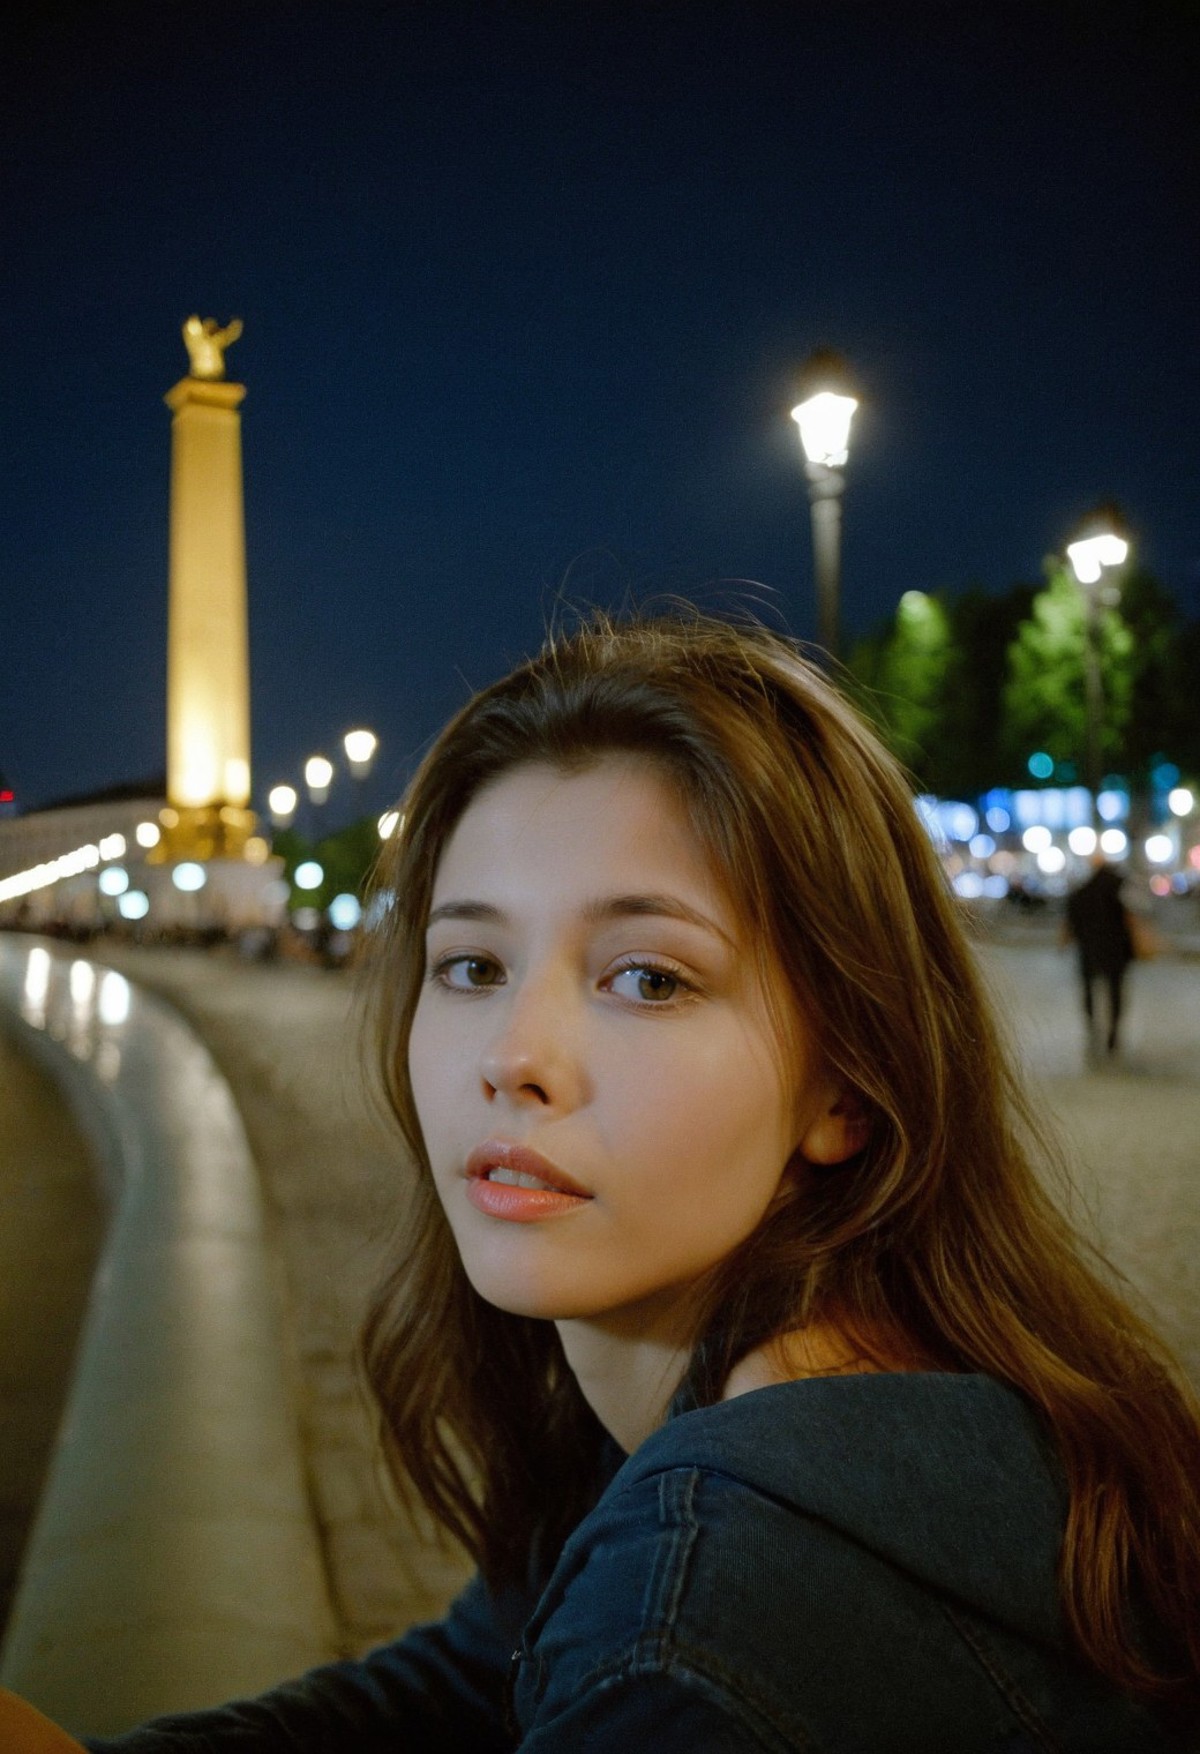 Mila Azul image by ManOfCulture